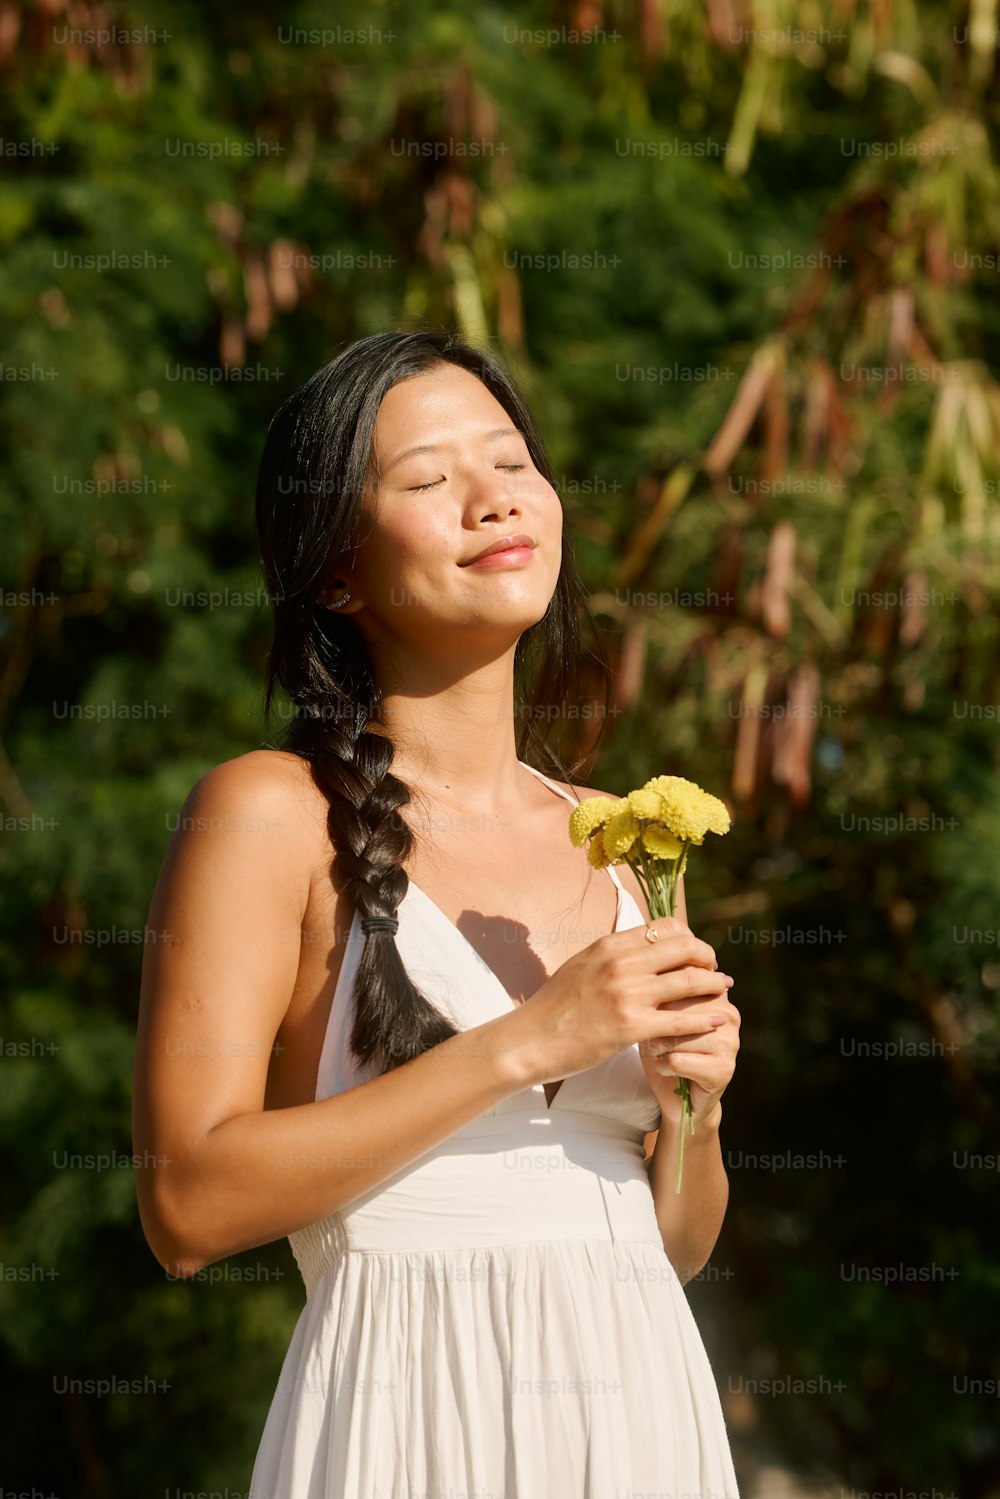 a woman in a white dress holding a yellow flower